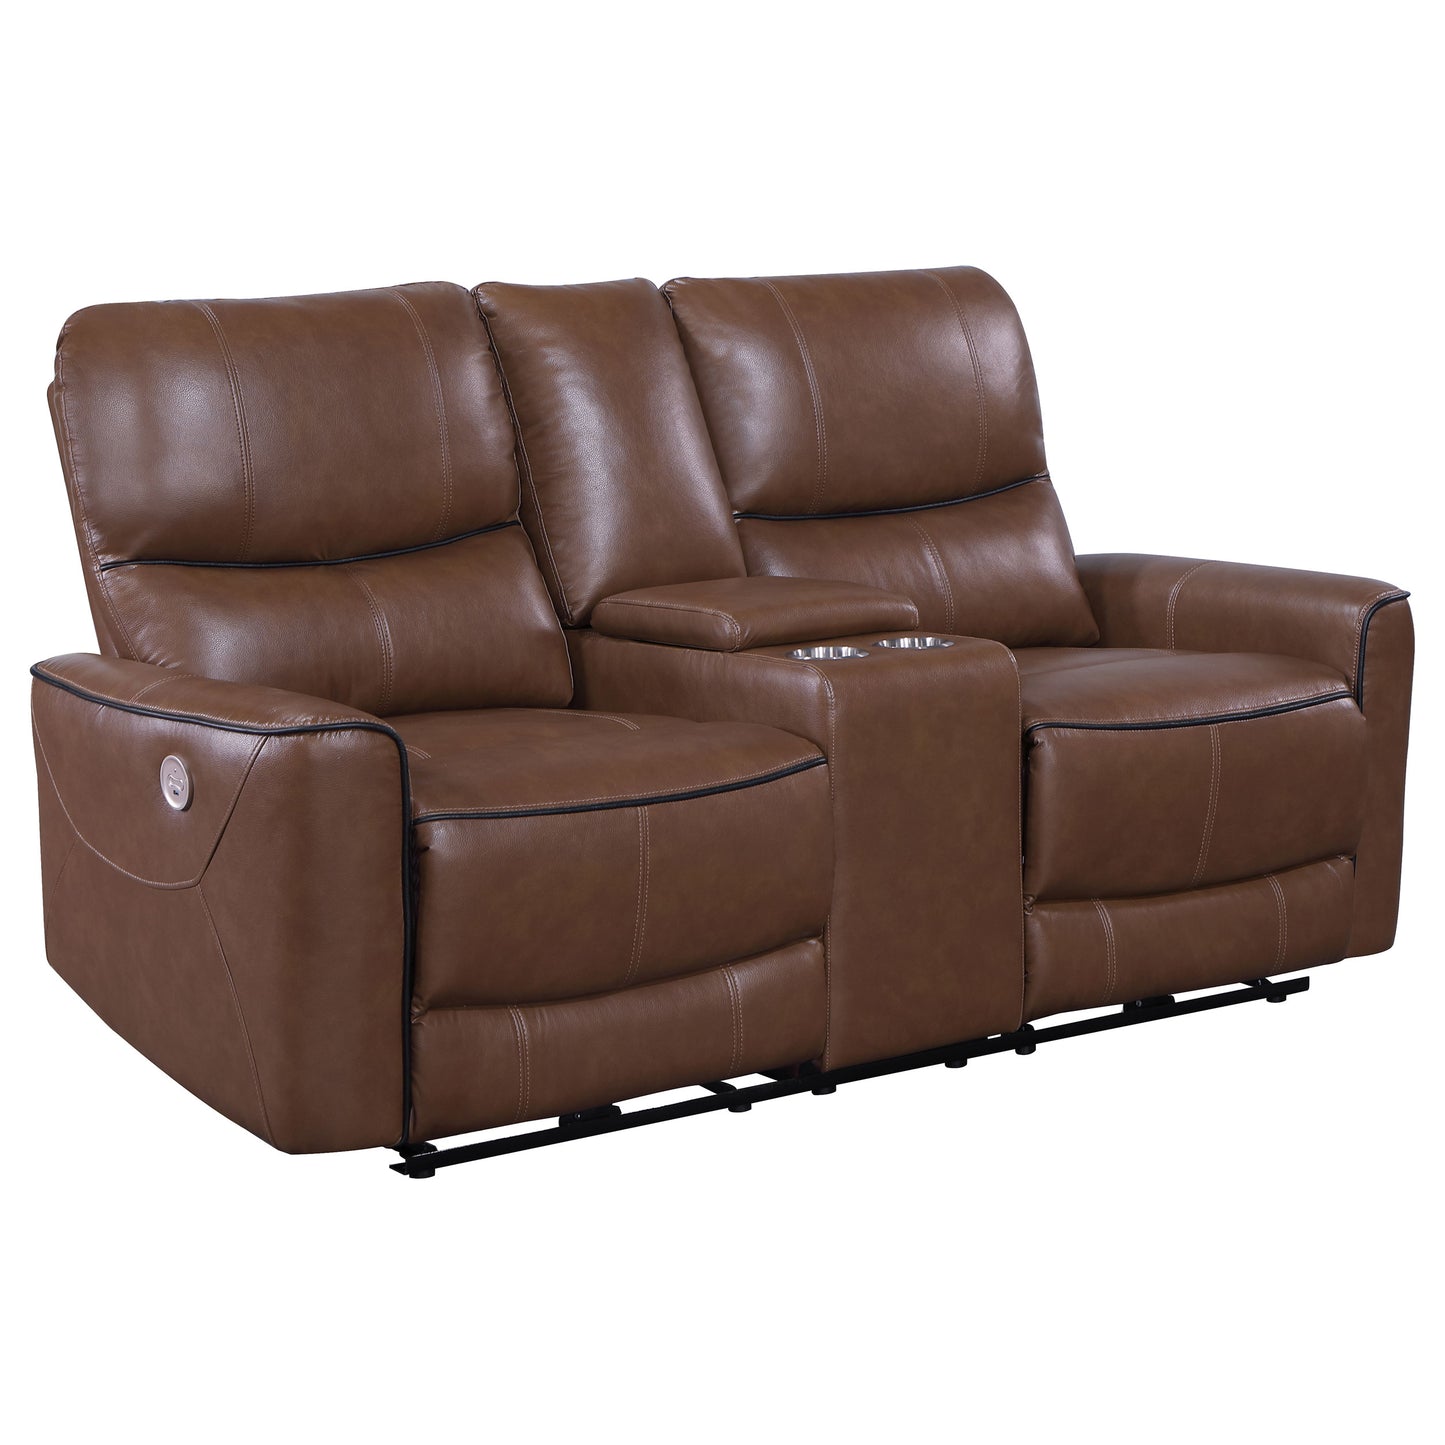 Greenfield Upholstered Power Reclining Loveseat with Console Saddle Brown